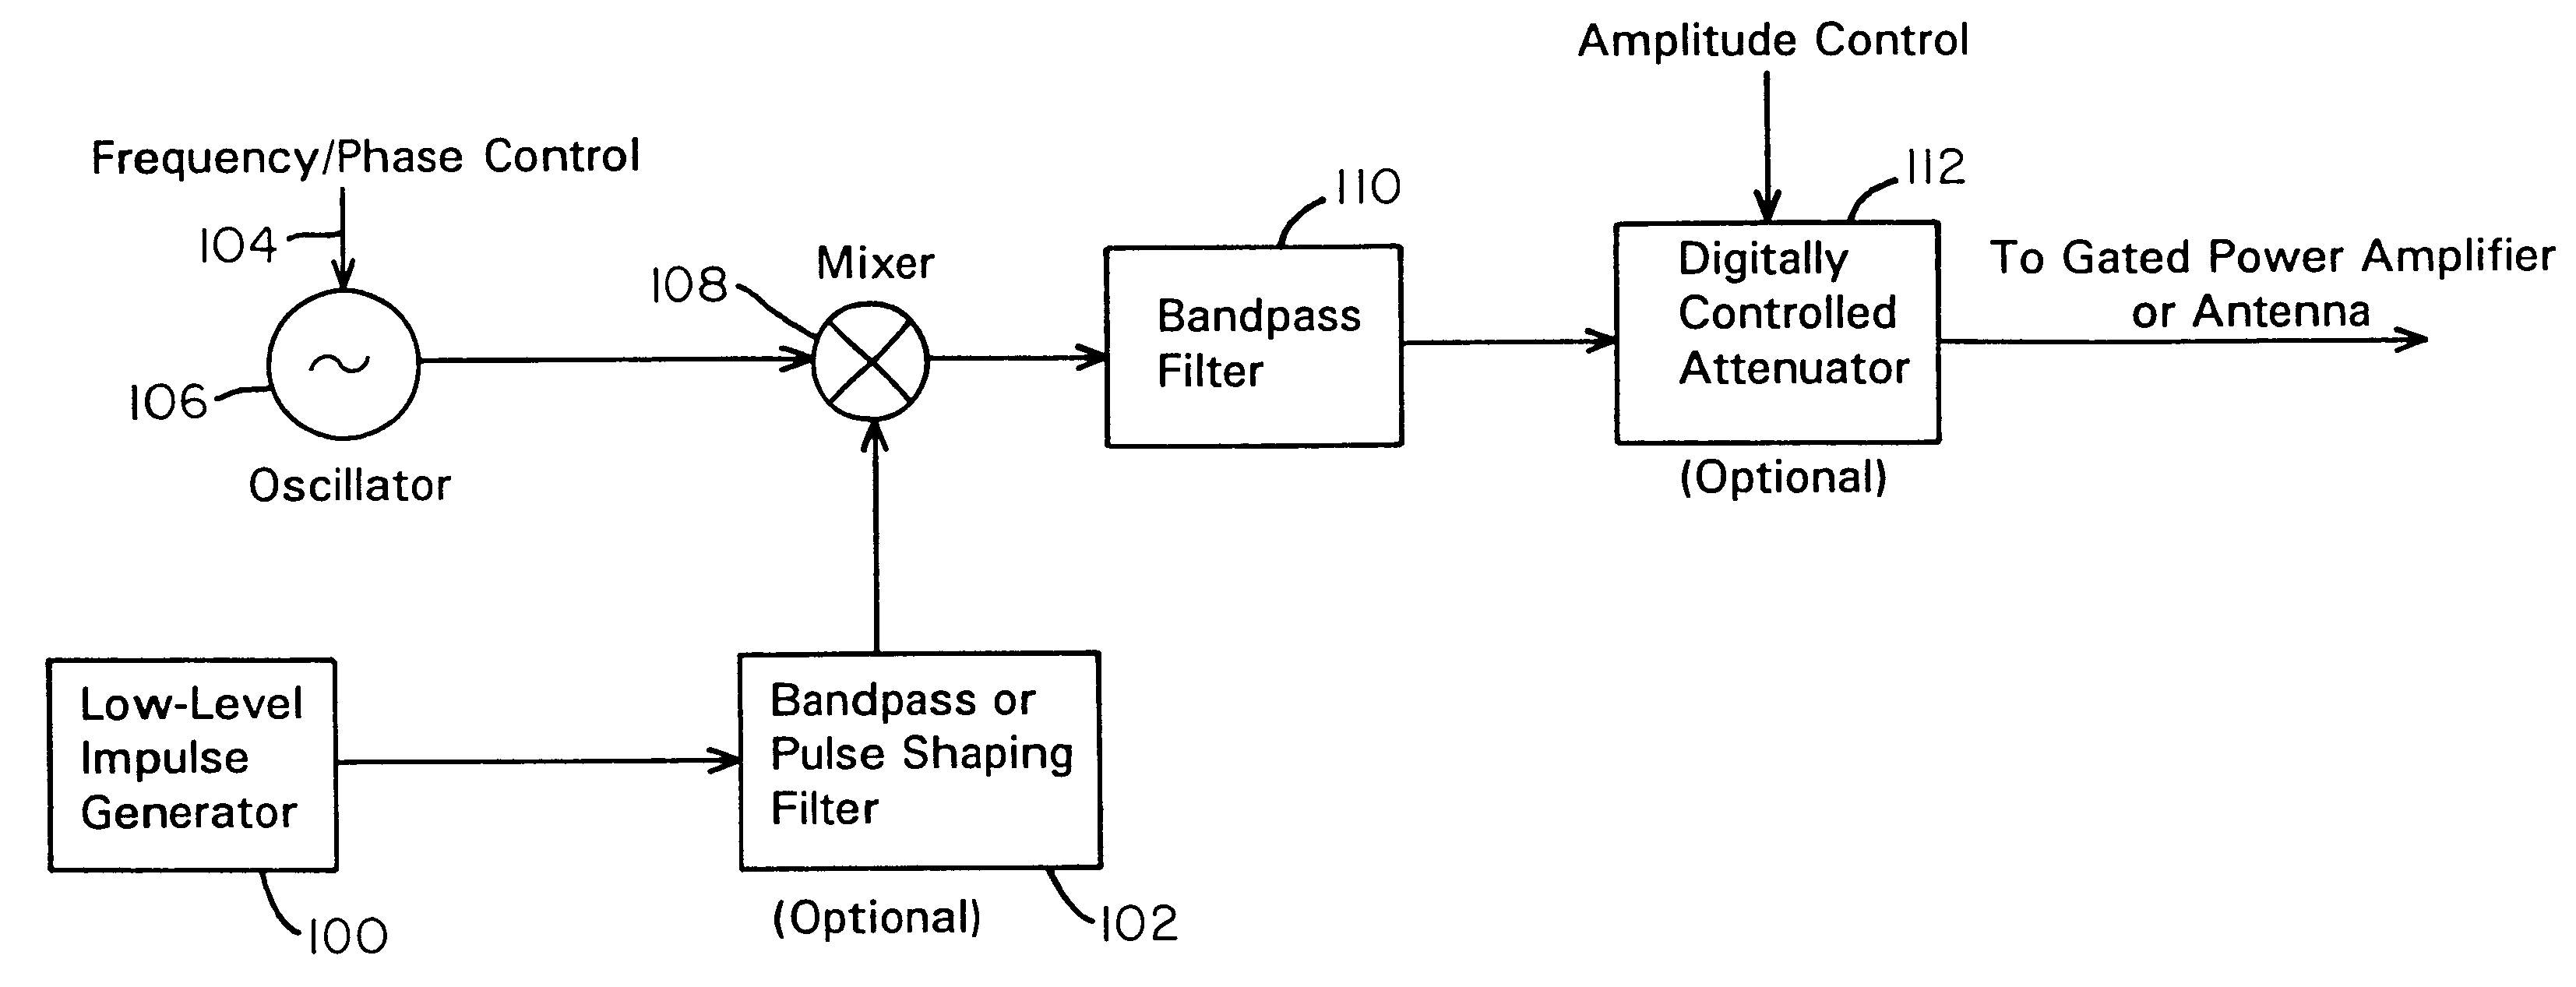 Ultra wideband data transmission system and method